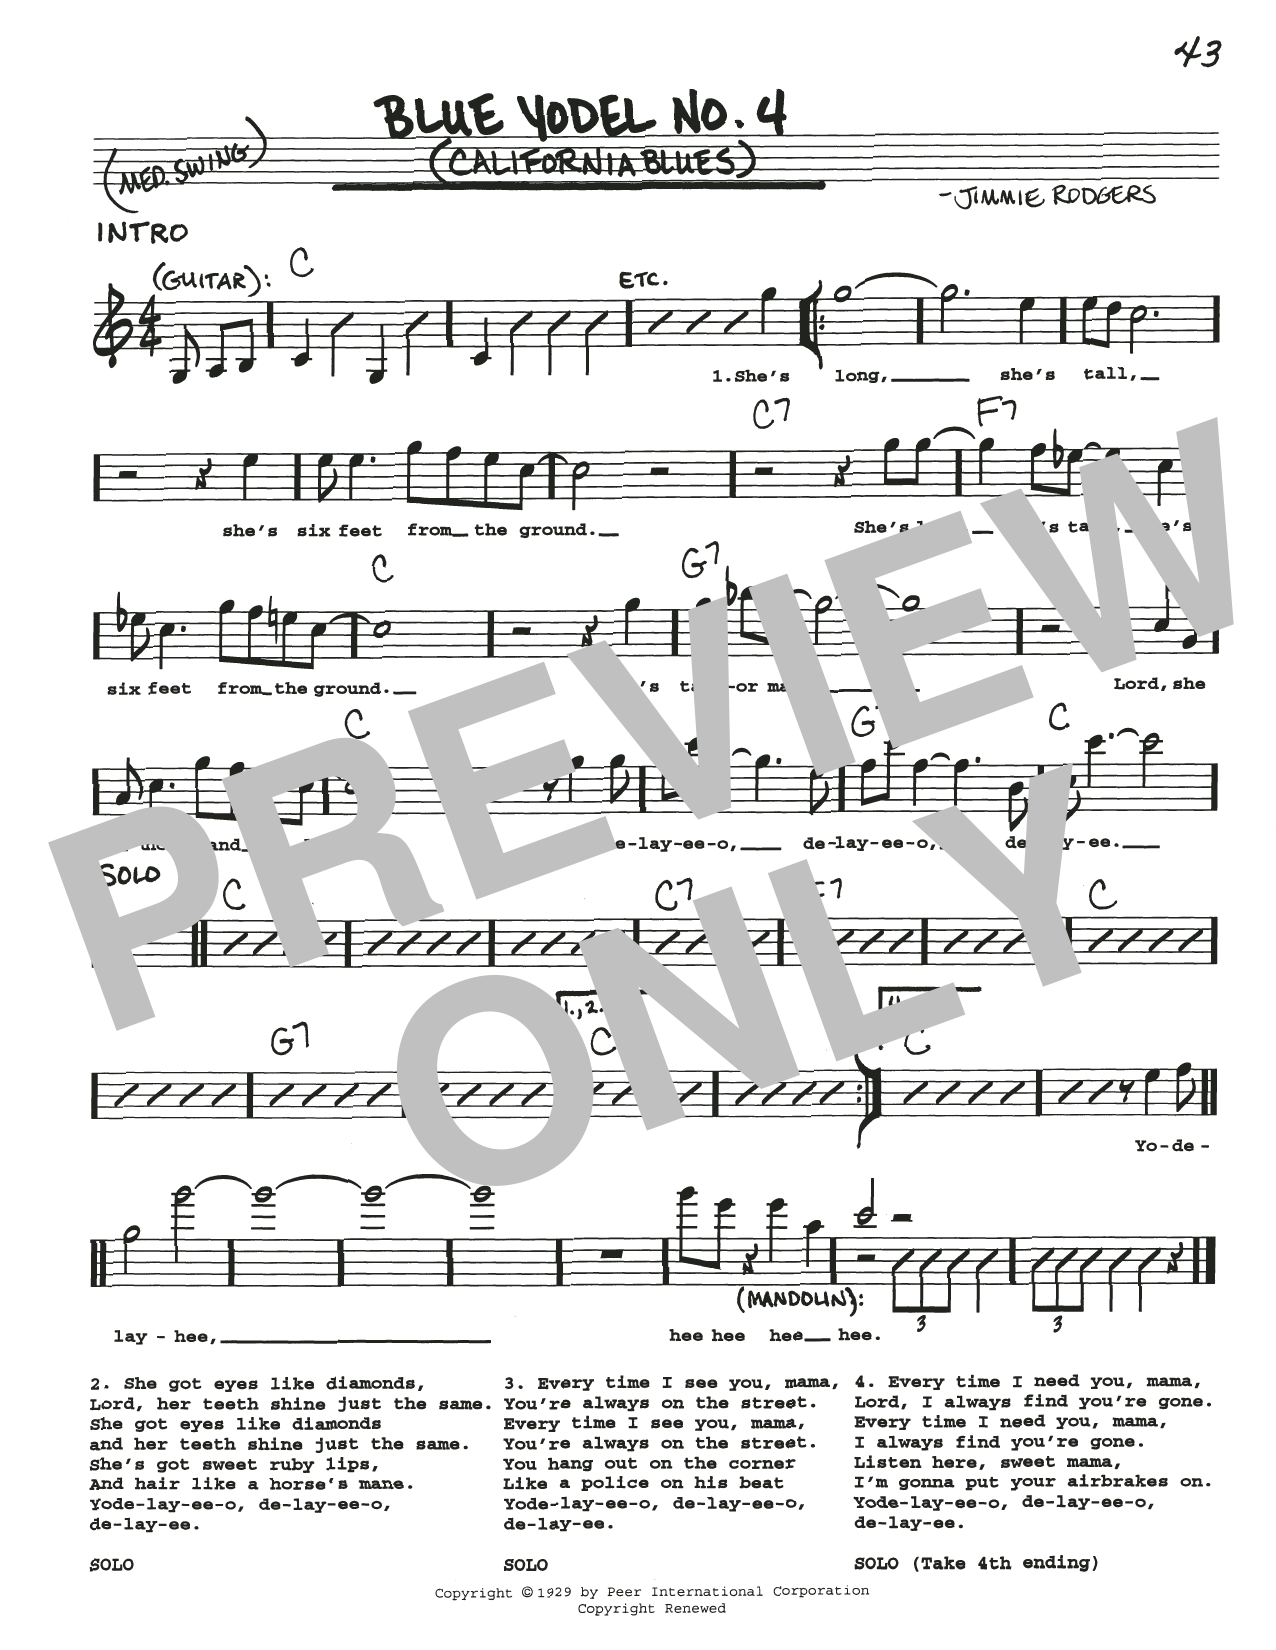 Download Jimmie Rodgers Blue Yodel No. 4 (California Blues) Sheet Music